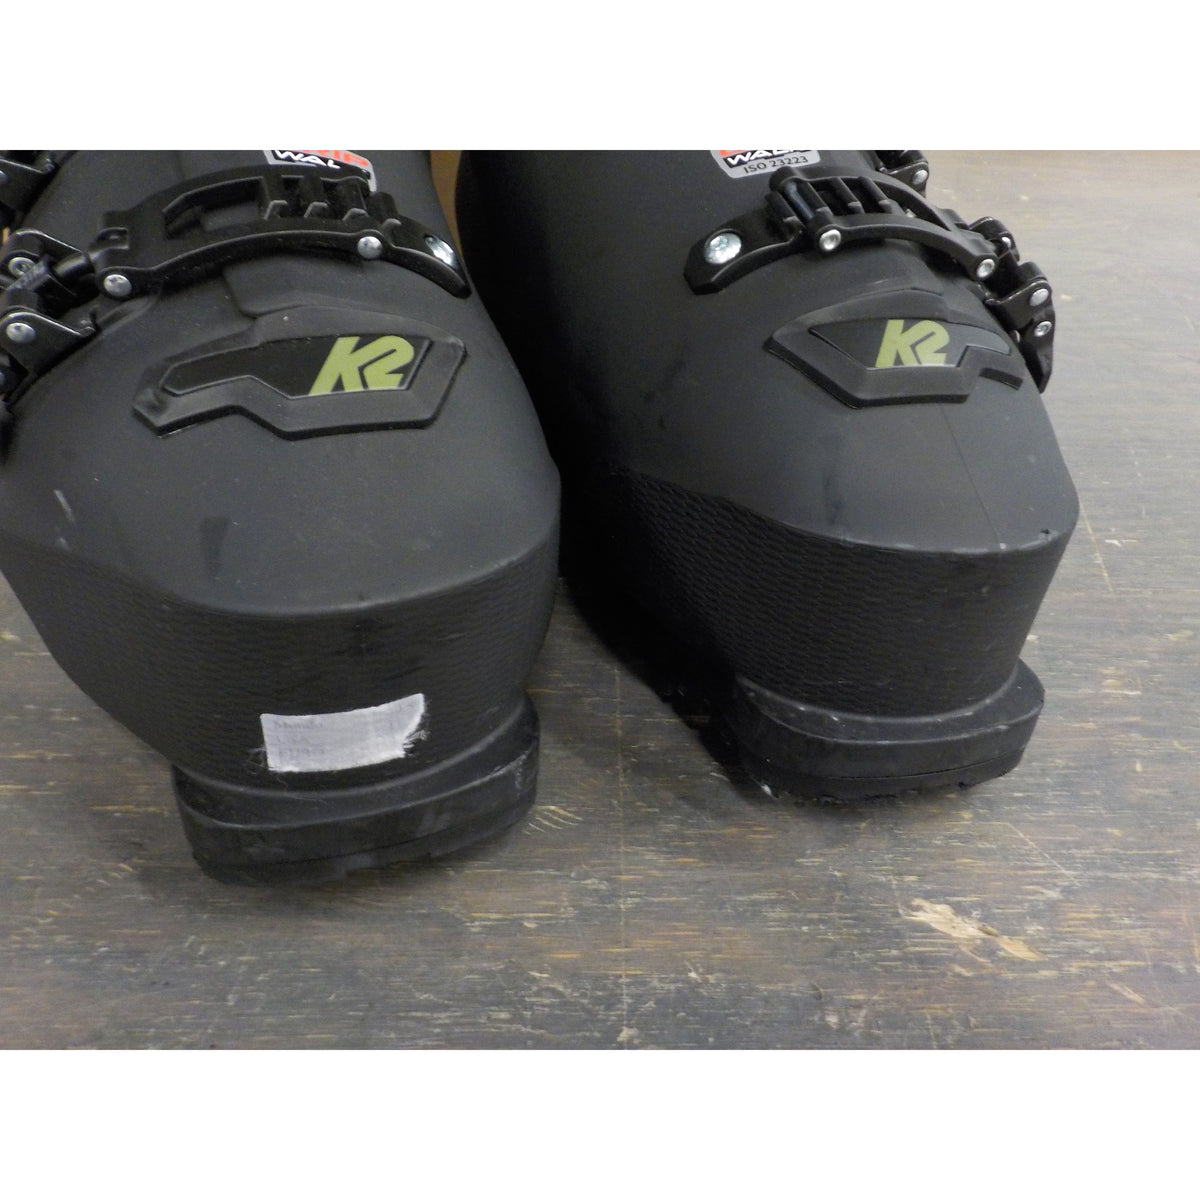 K2 BFC 90 Ski Boots - 29.5 - Used - Acceptable